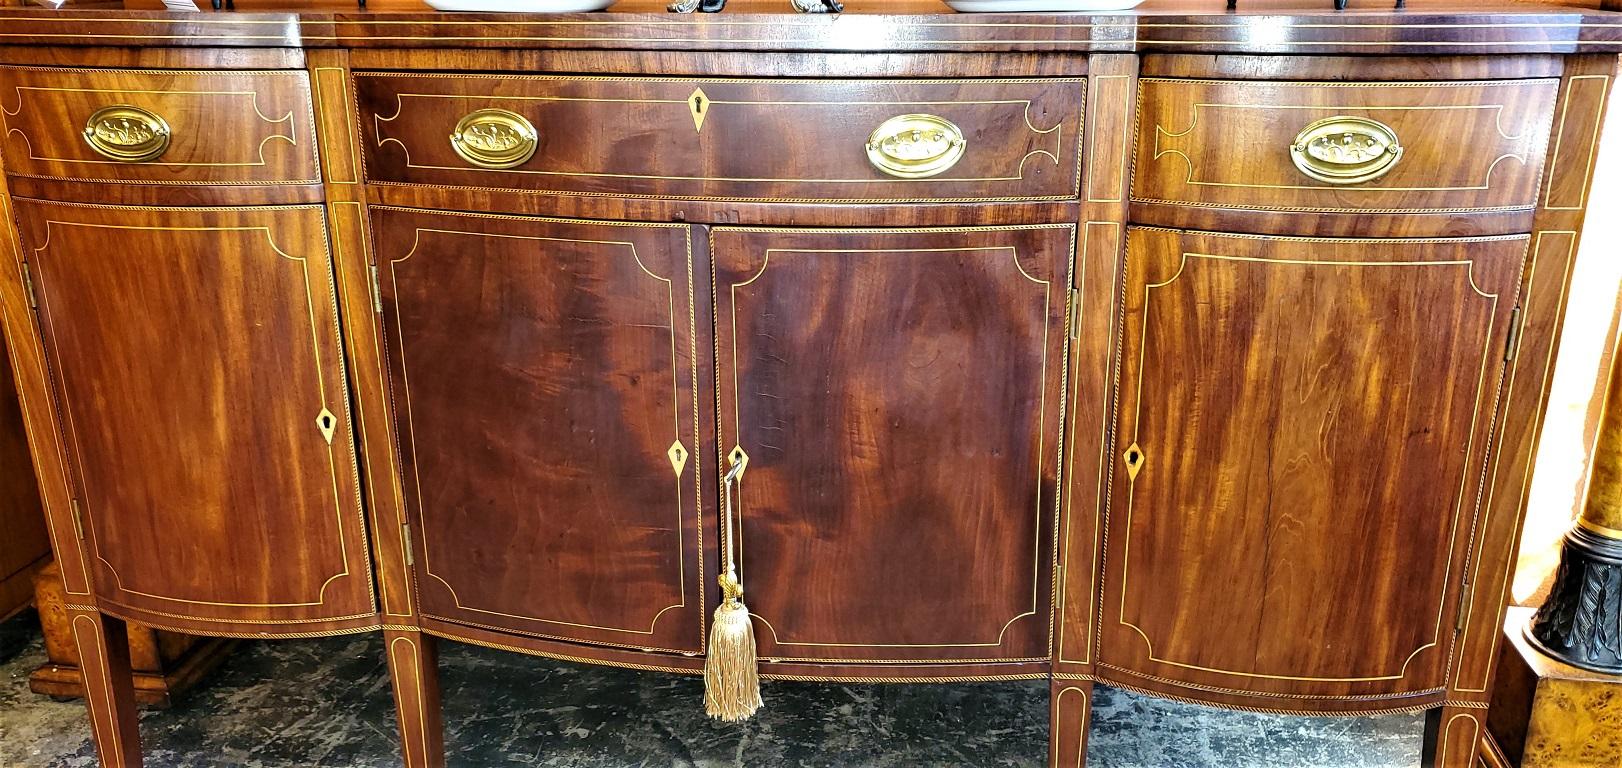 Early 19th Century American Sheraton Sideboard Attributable to Duncan Phyfe For Sale 8